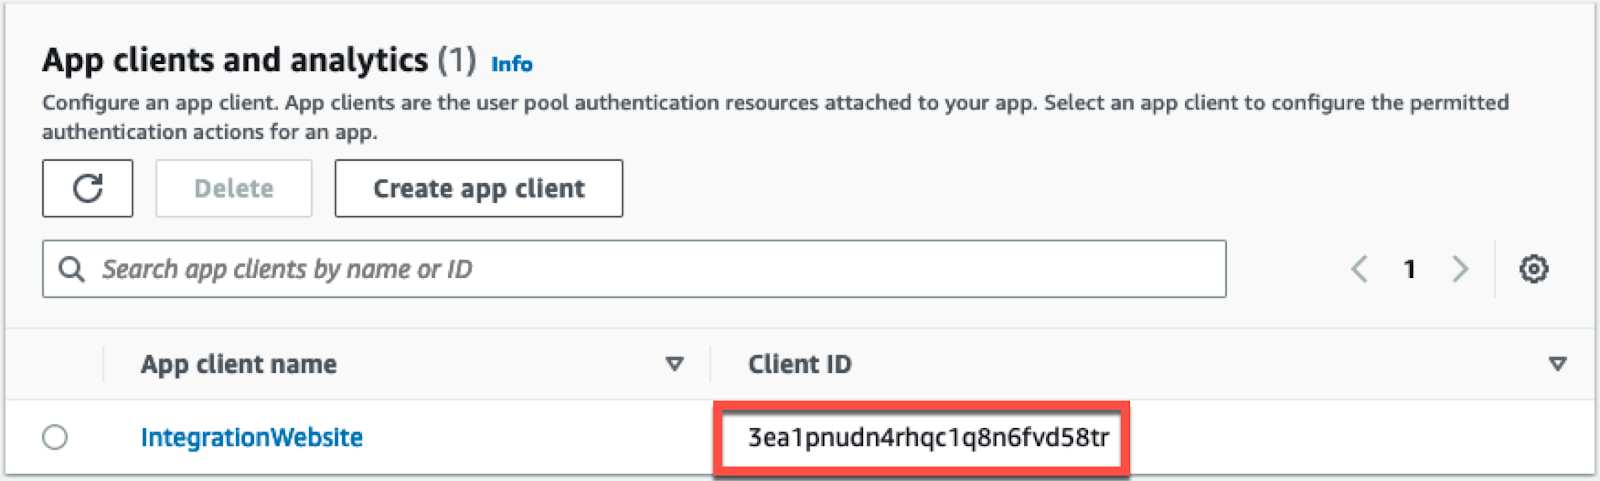 Record the application client ID for use later. 